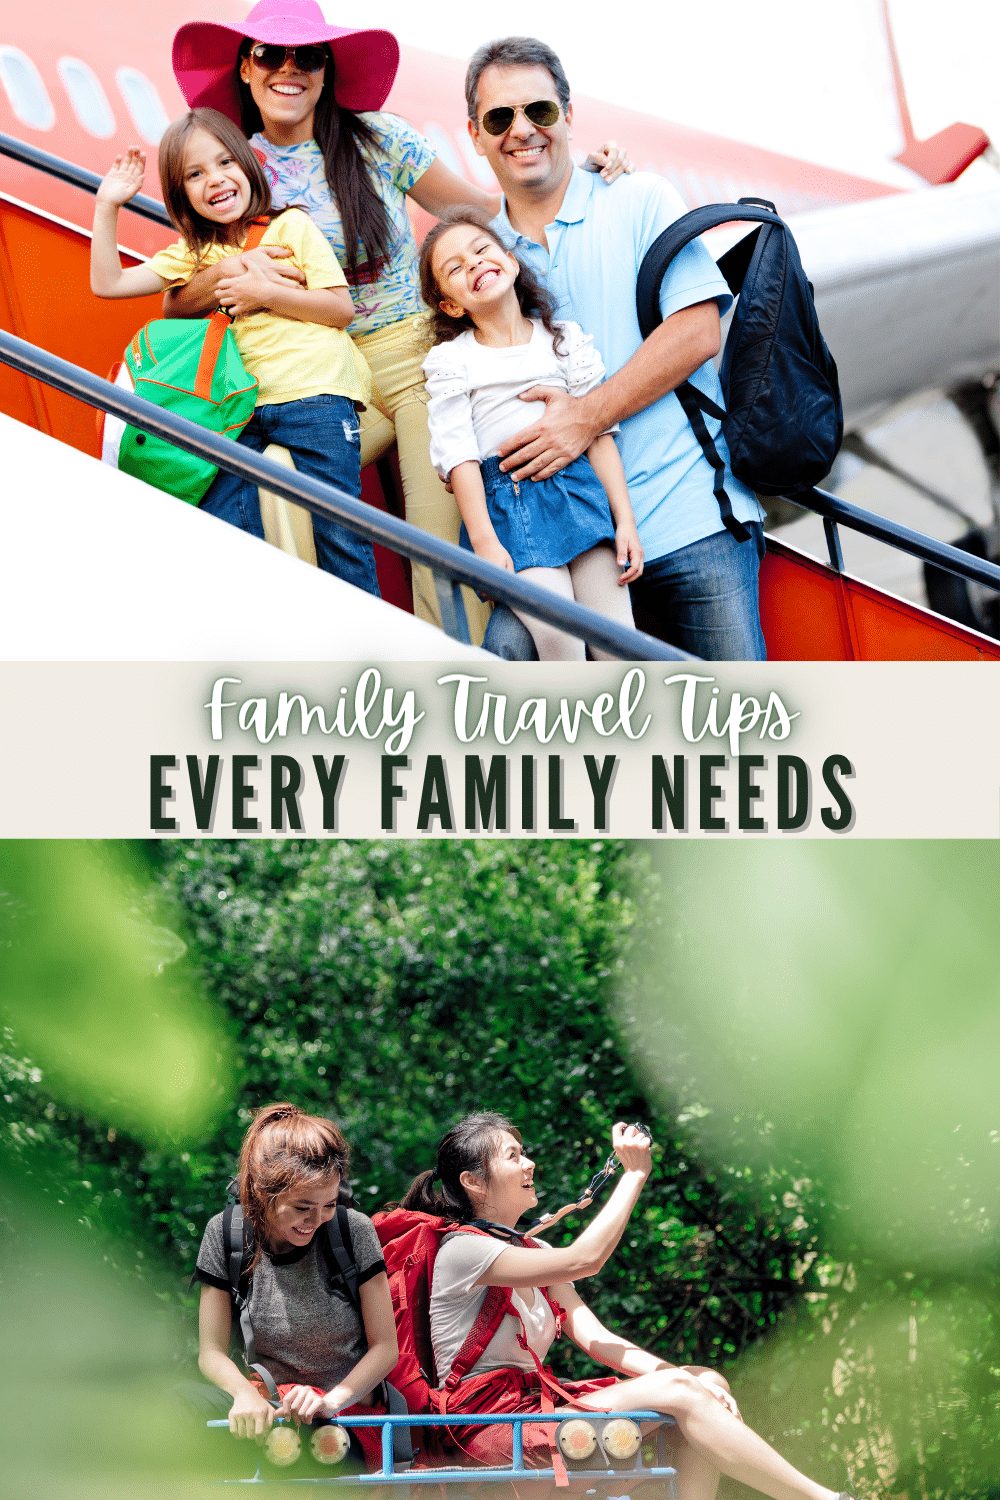 These family travel tips are perfect for any type of family vacation, Spring break, summer fun or holiday adventure! Simple and easy to implement! #travel #traveltips #family #vacation via @wondermomwannab